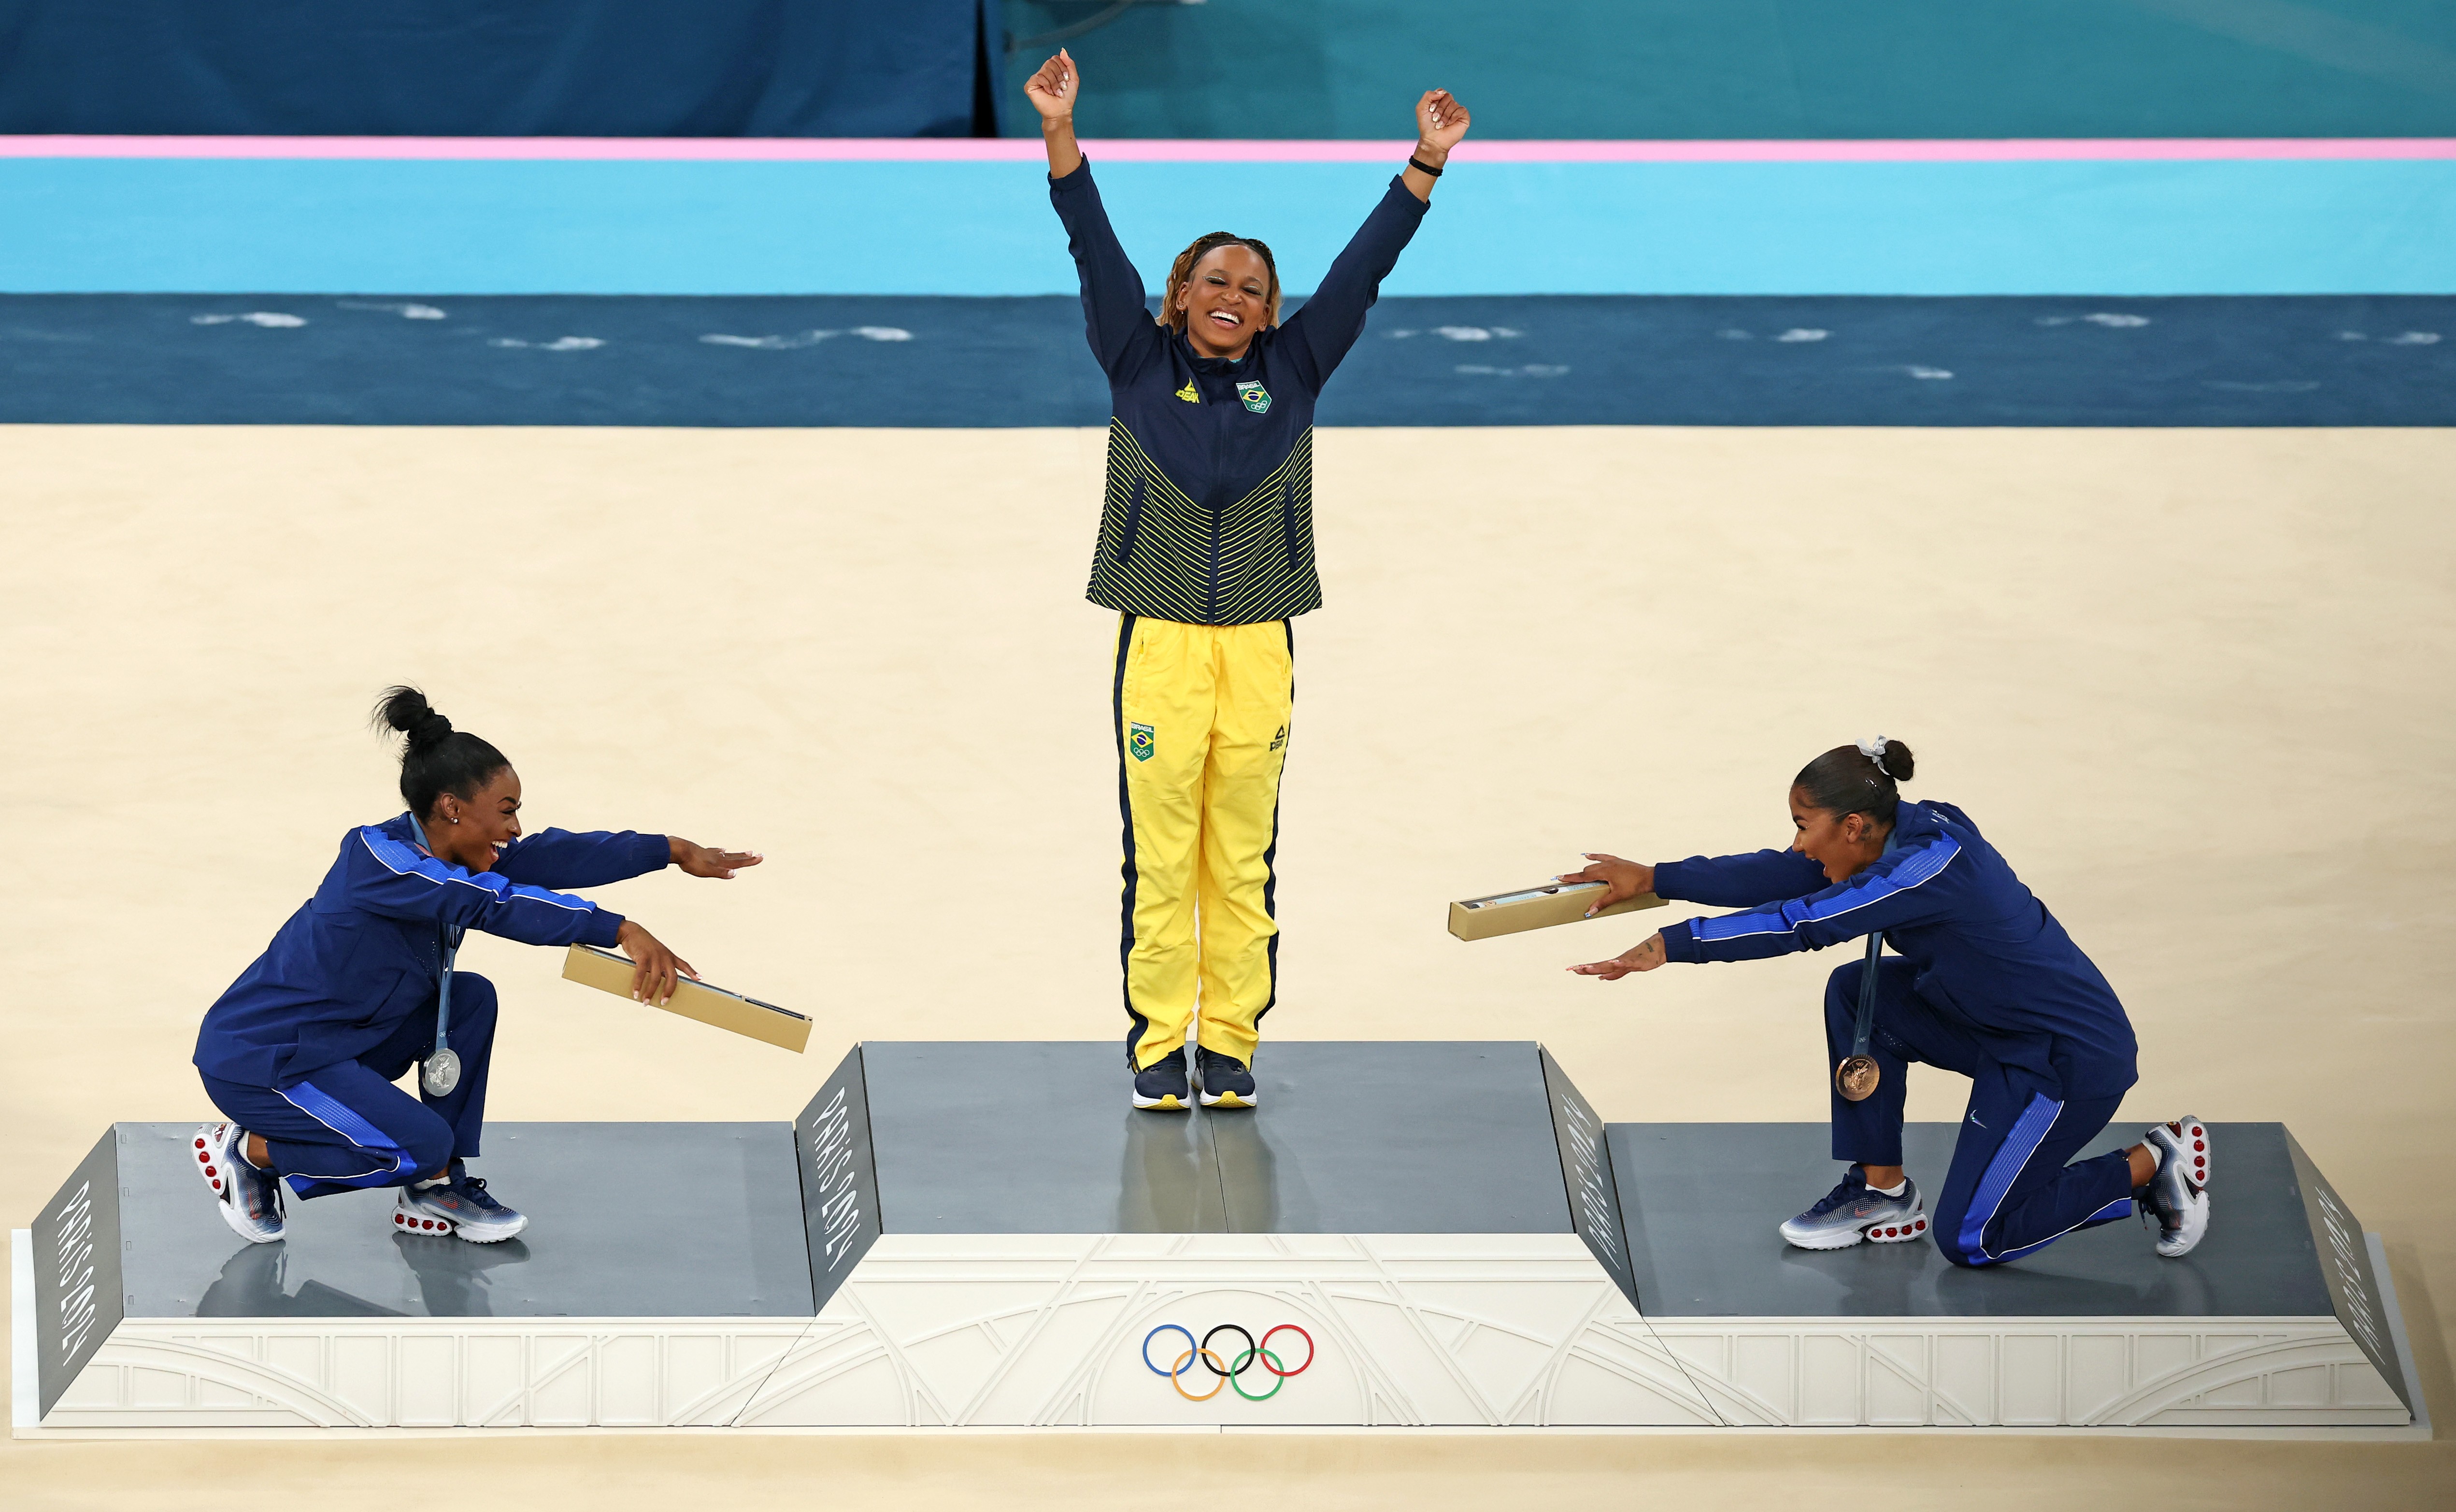 Olympics Photo of the Day: Respect, Recognition, and Joyful Support